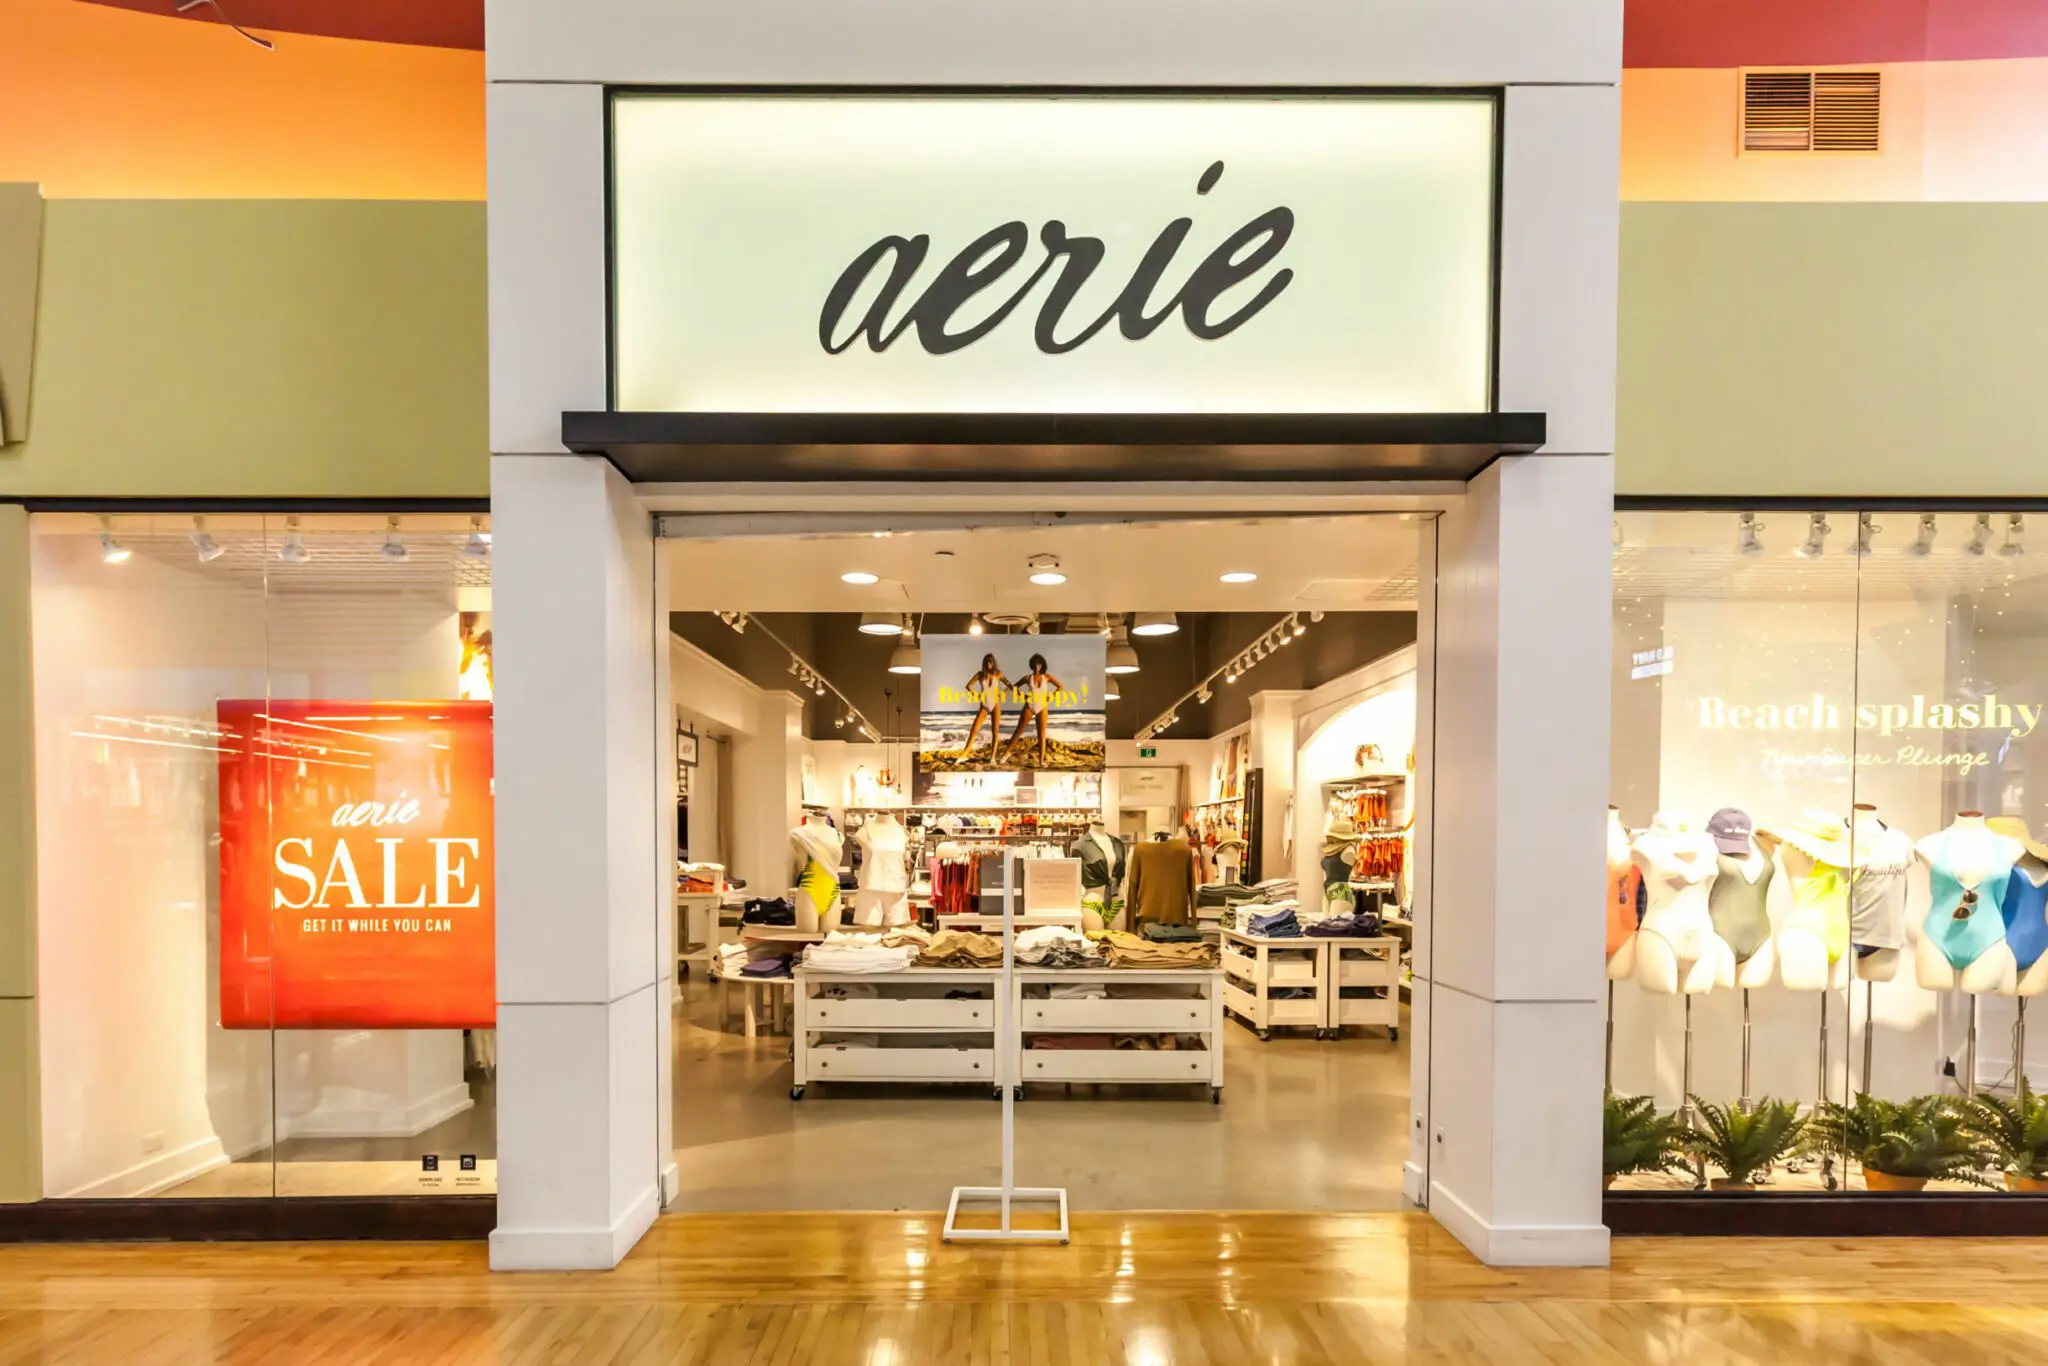 Marketing Strategy and Marketing Mix of Aerie